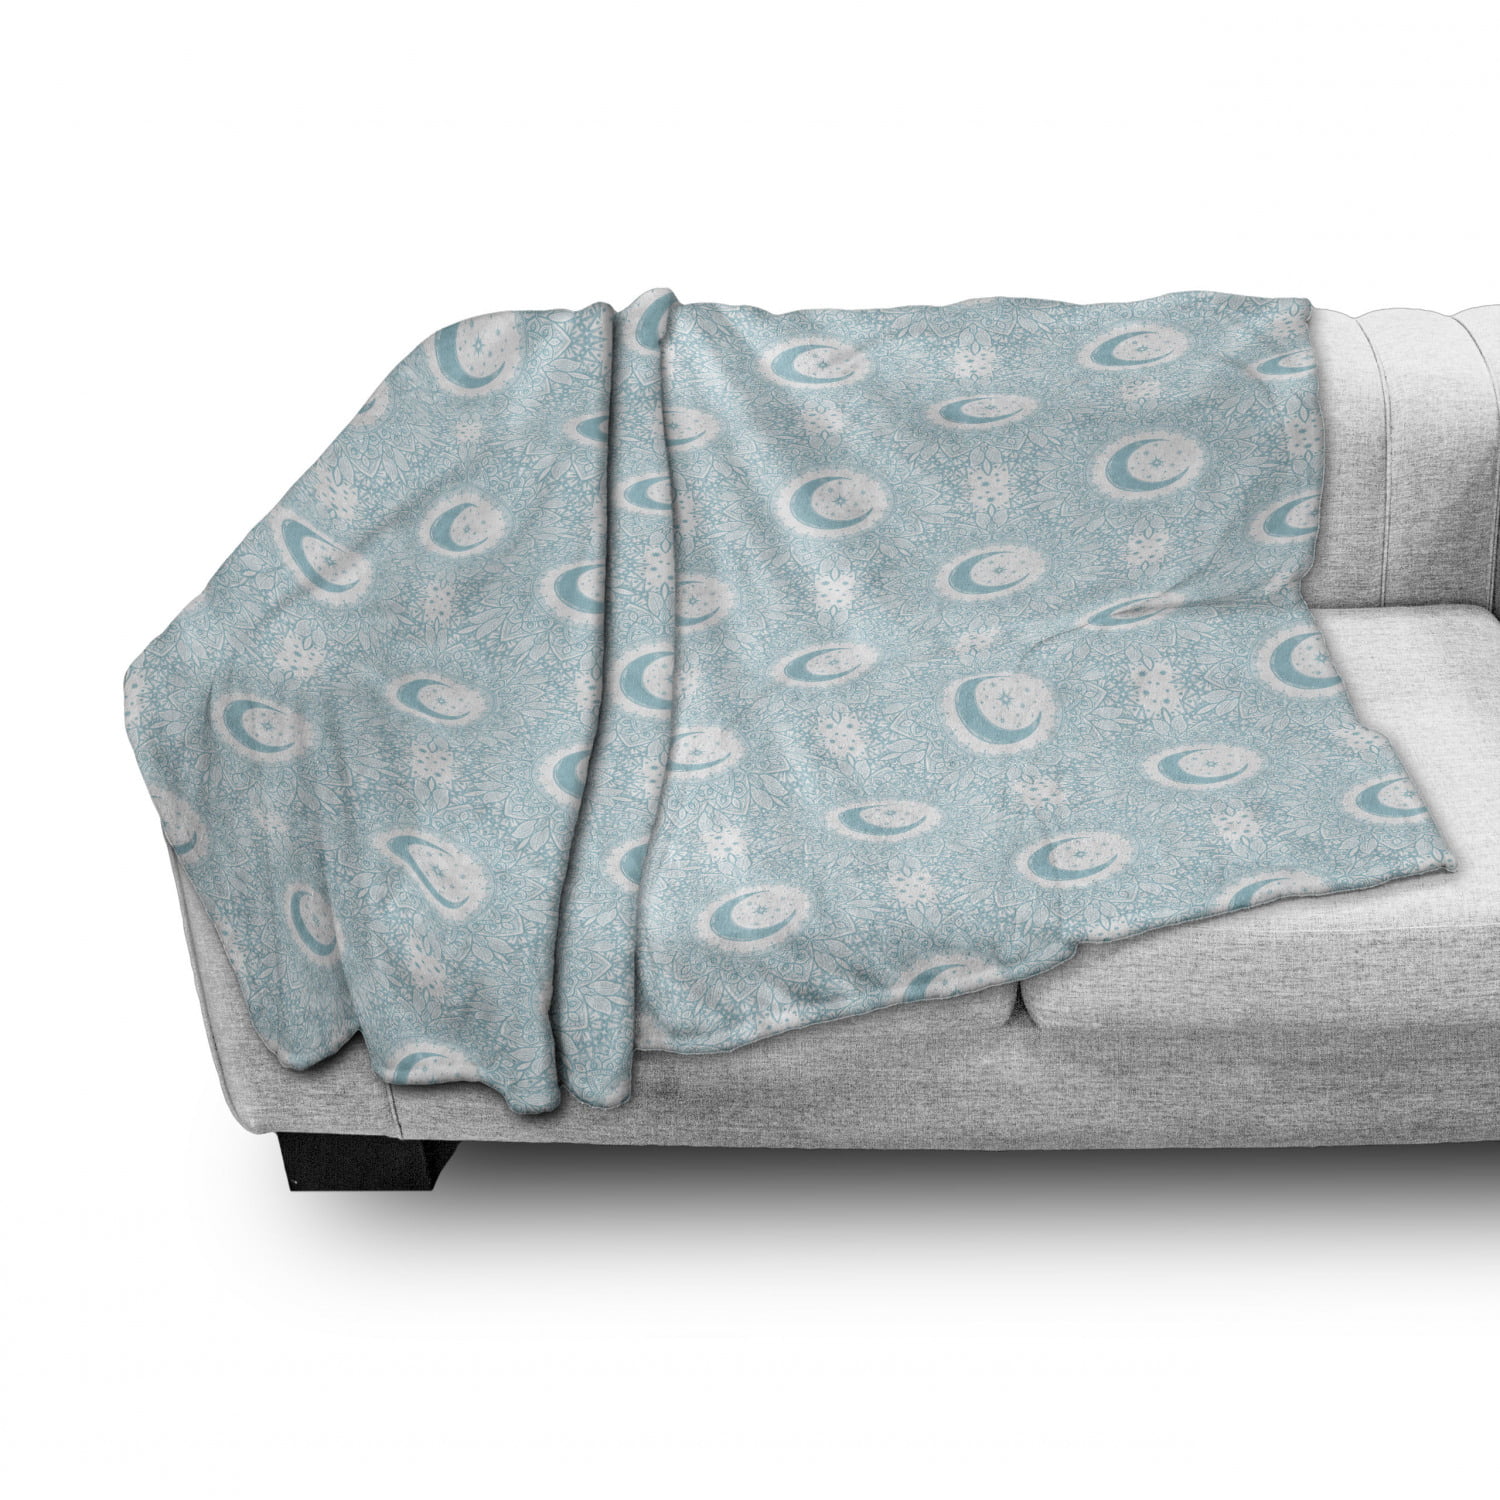 Monochrome Bohemian Illustration of Floral Details and Crescent Moon Cozy Plush for Indoor and Outdoor Use 50 x 60 Ambesonne Oriental Soft Flannel Fleece Throw Blanket Blue Grey and White 